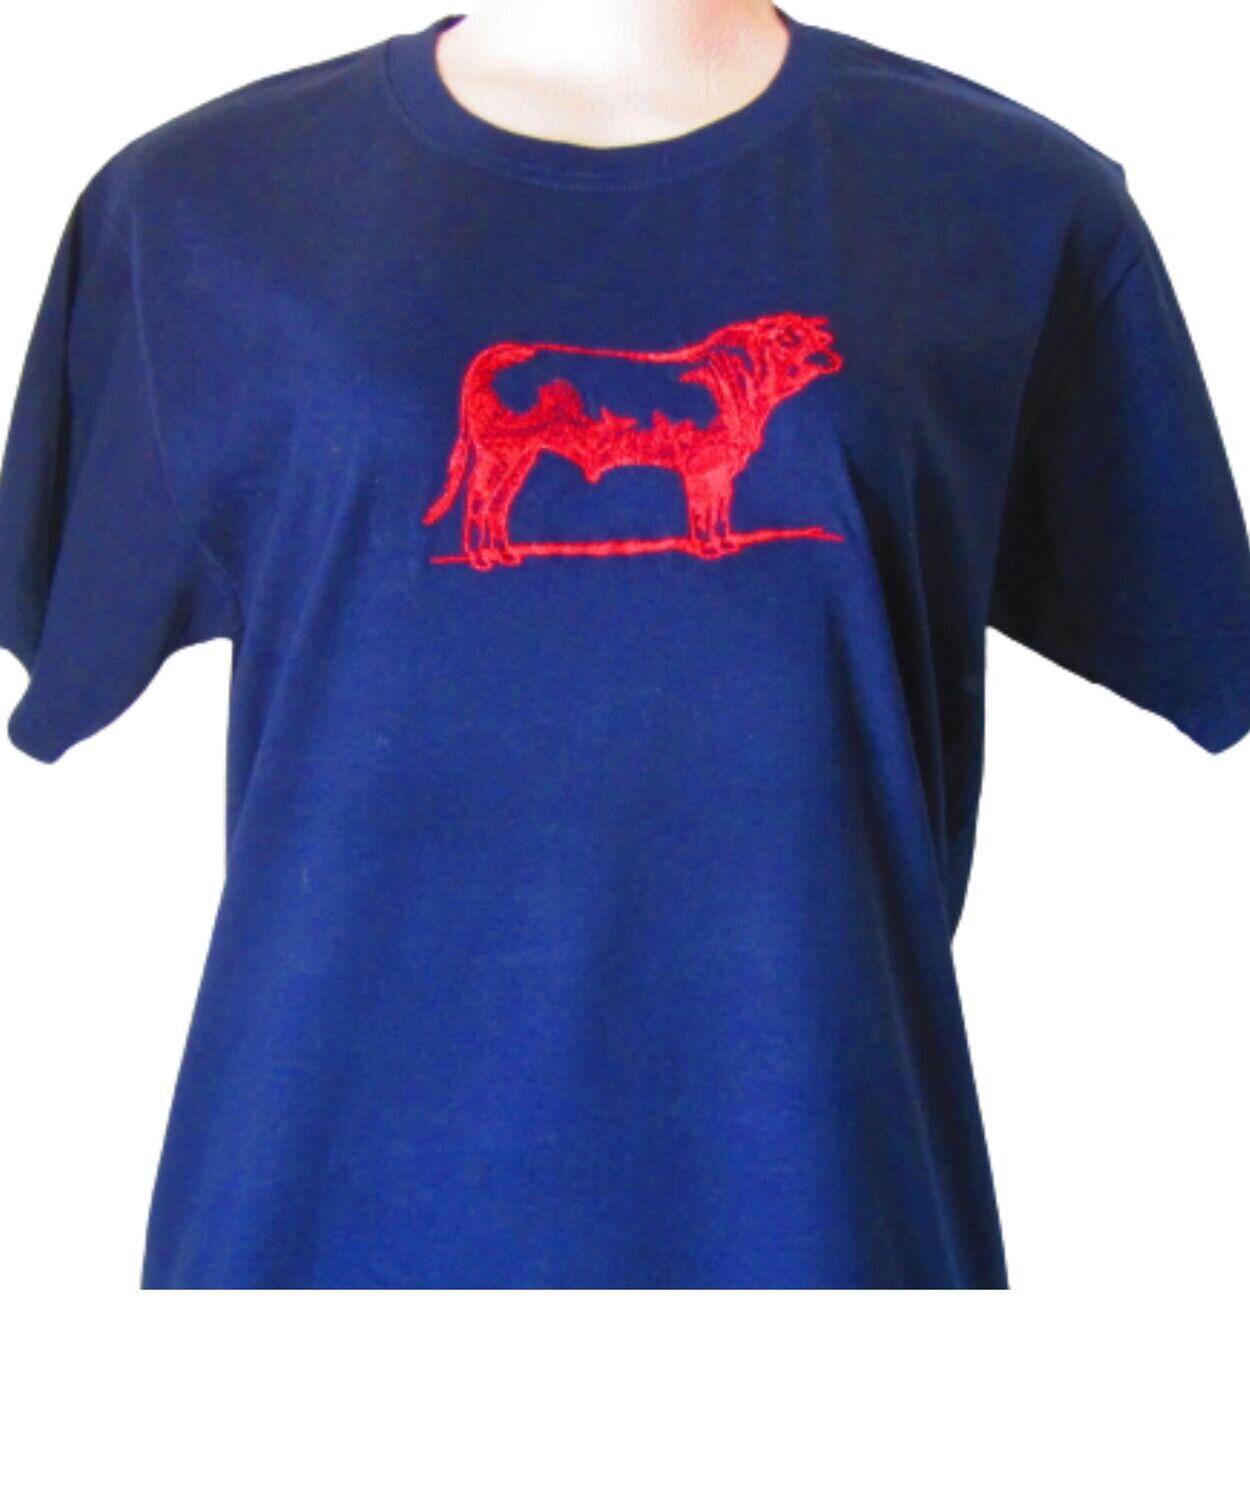 Red Bull Embroidered T-shirt